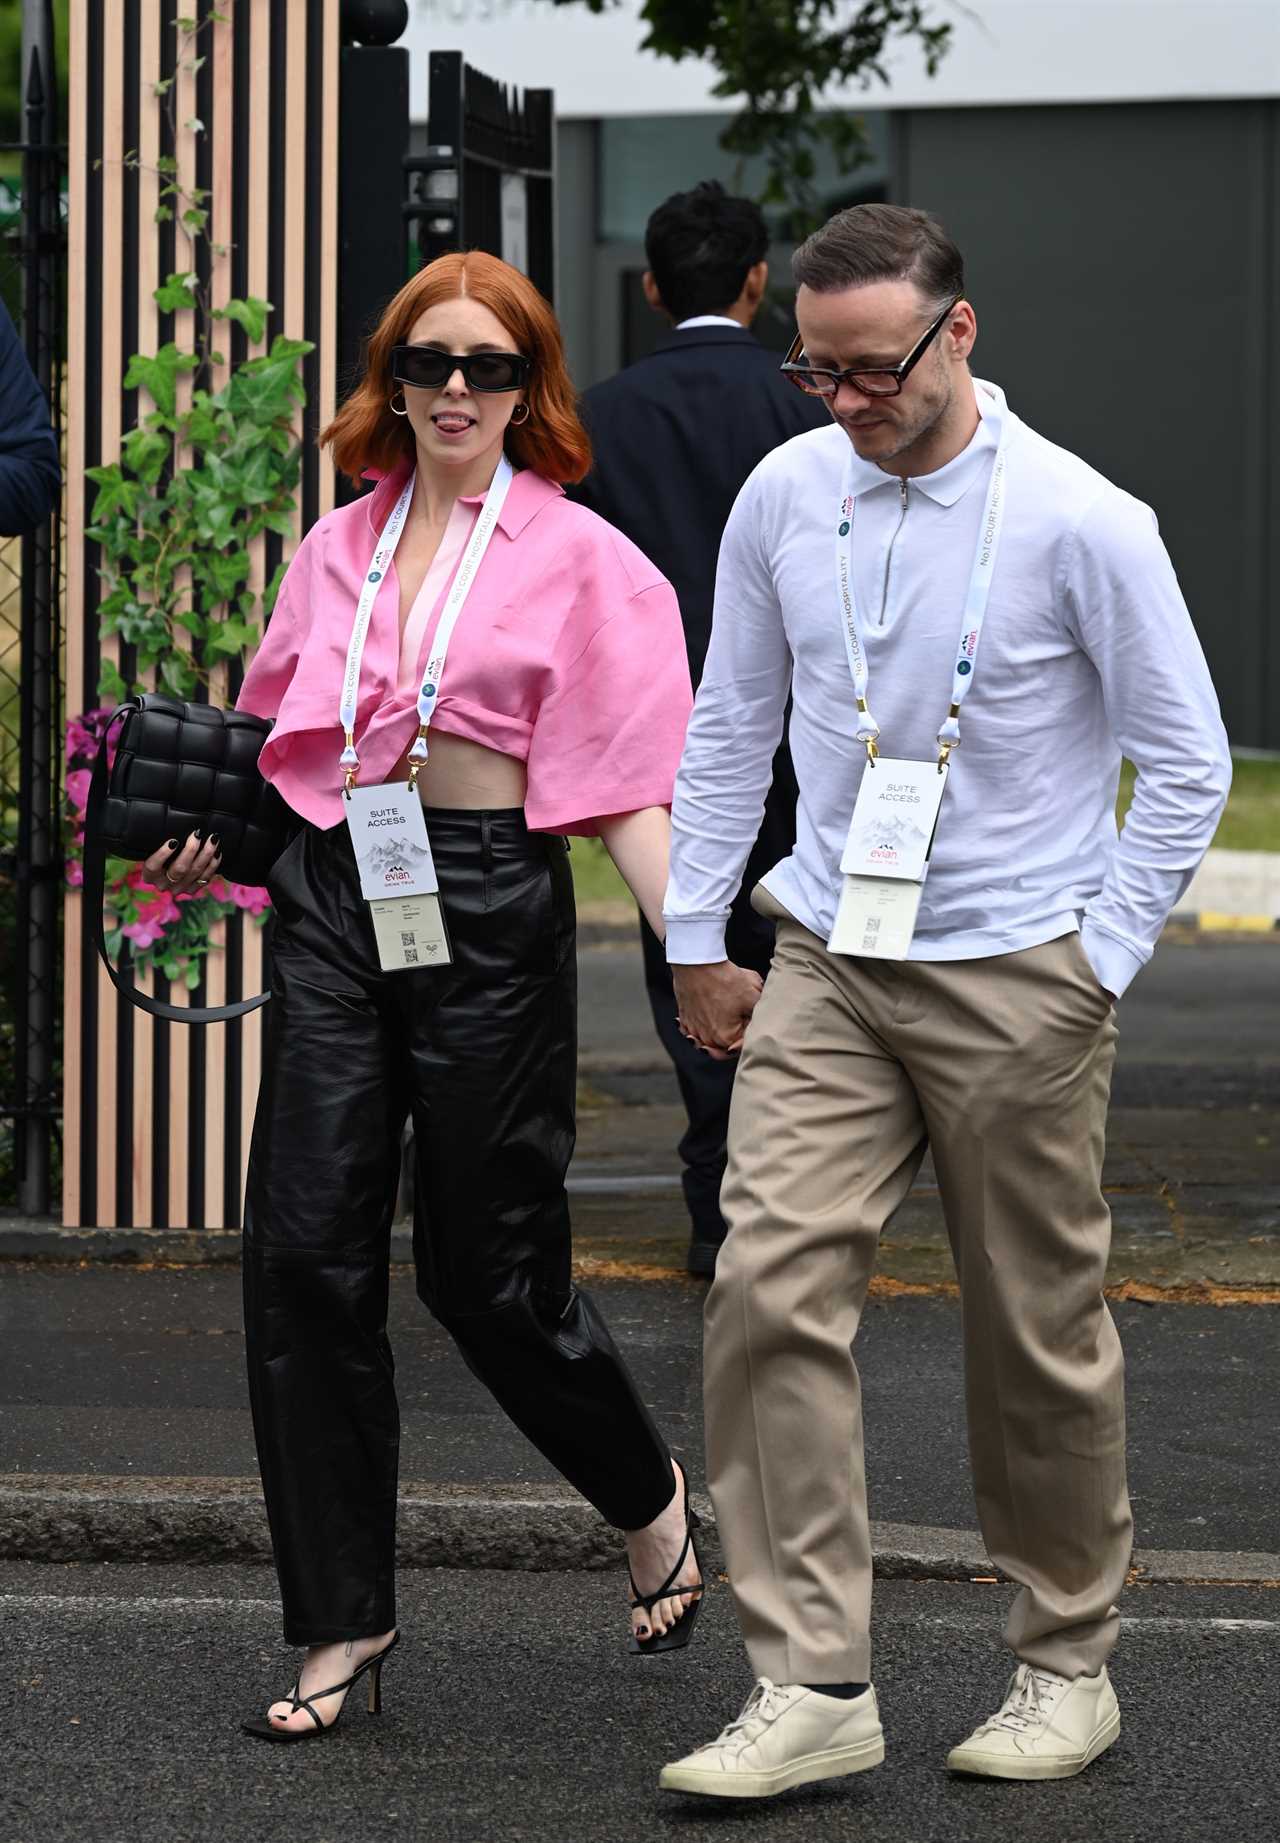 Pregnant Stacey Dooley says she has been in tears over pregnancy anxiety and reveals partner Kevin Clifton’s advice